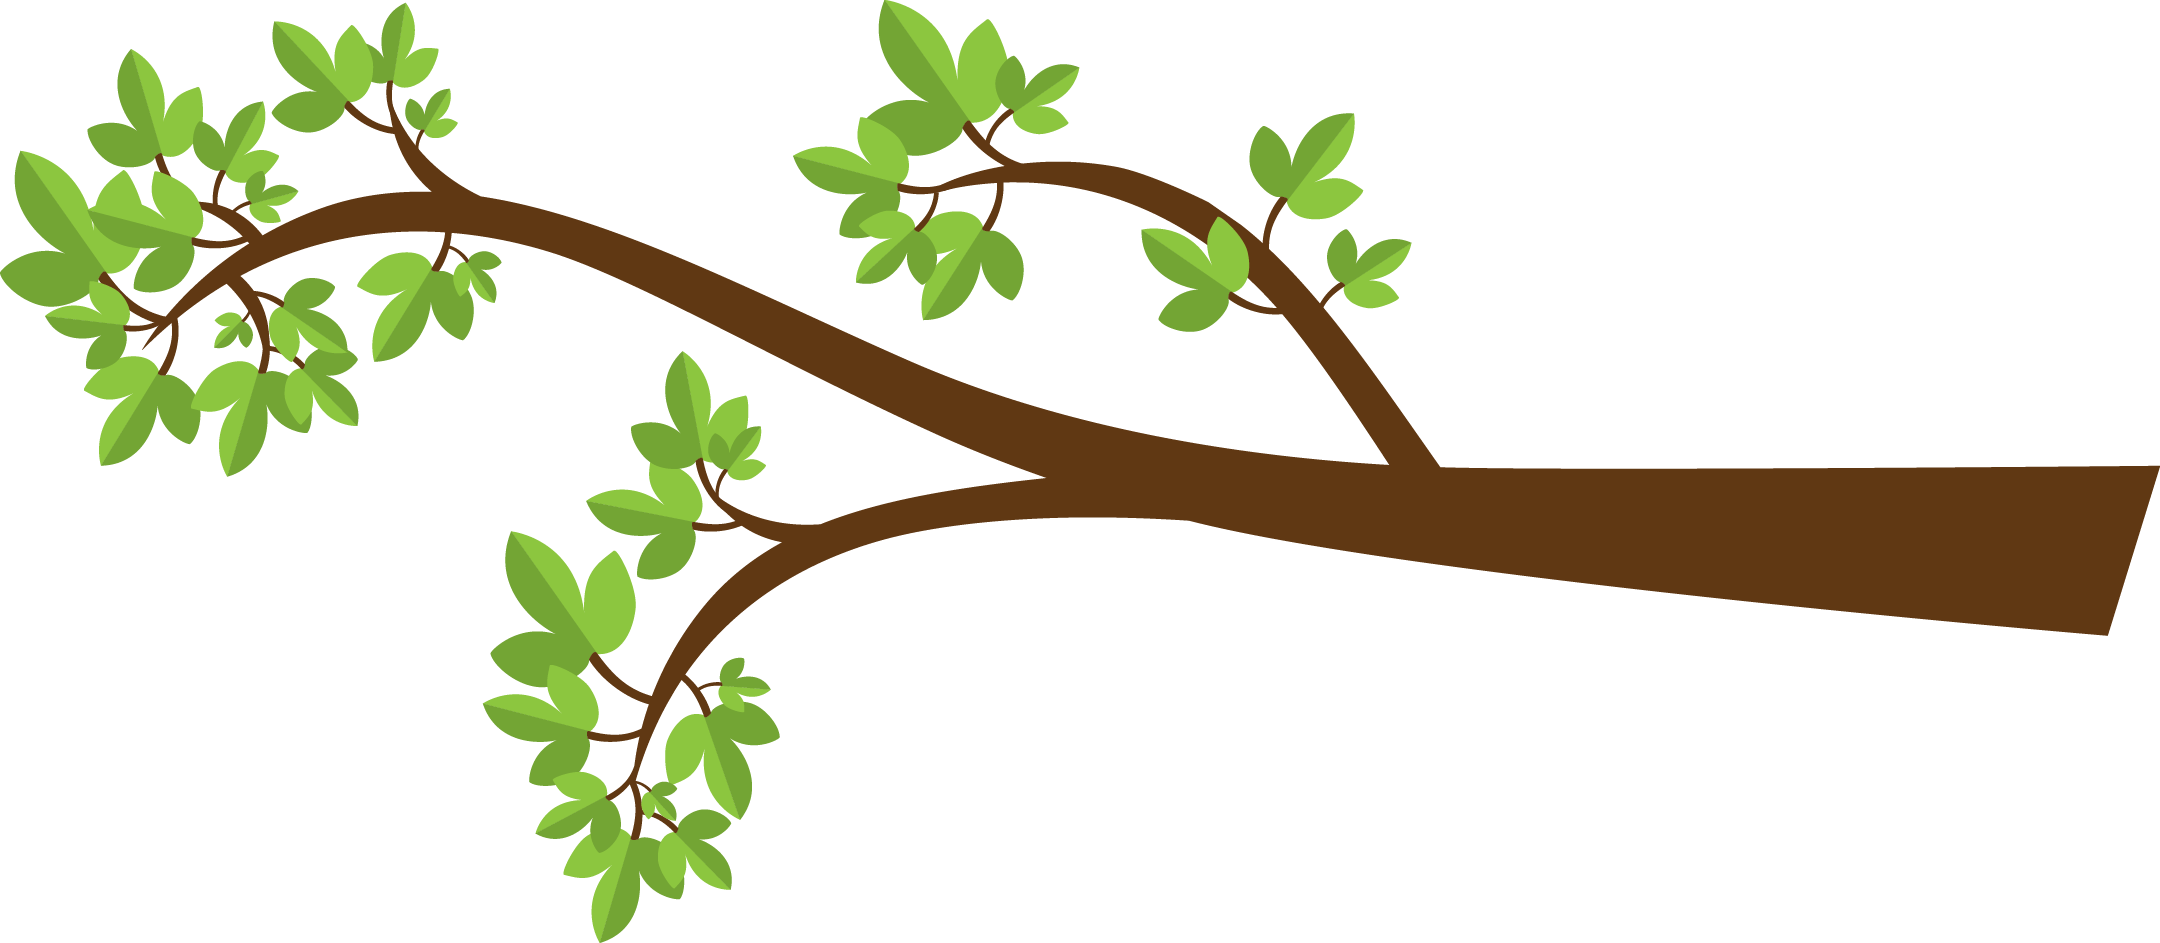 Tree branch clipart in water 